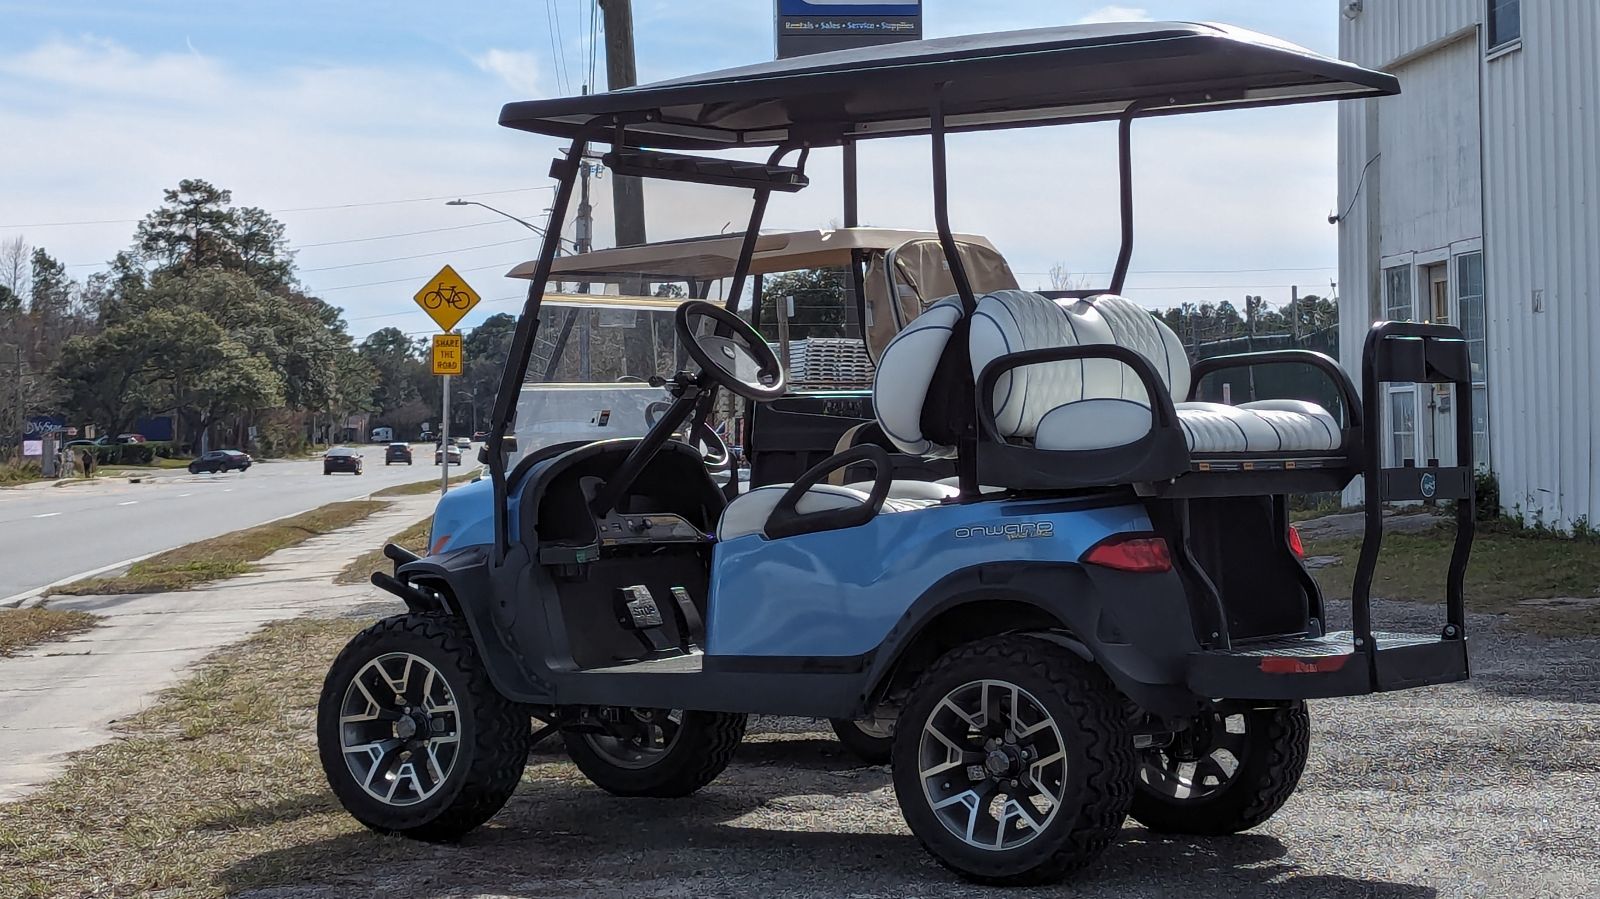 Golf cart drivers now must be at least 18 years old. | Will Brown, Jacksonville Today